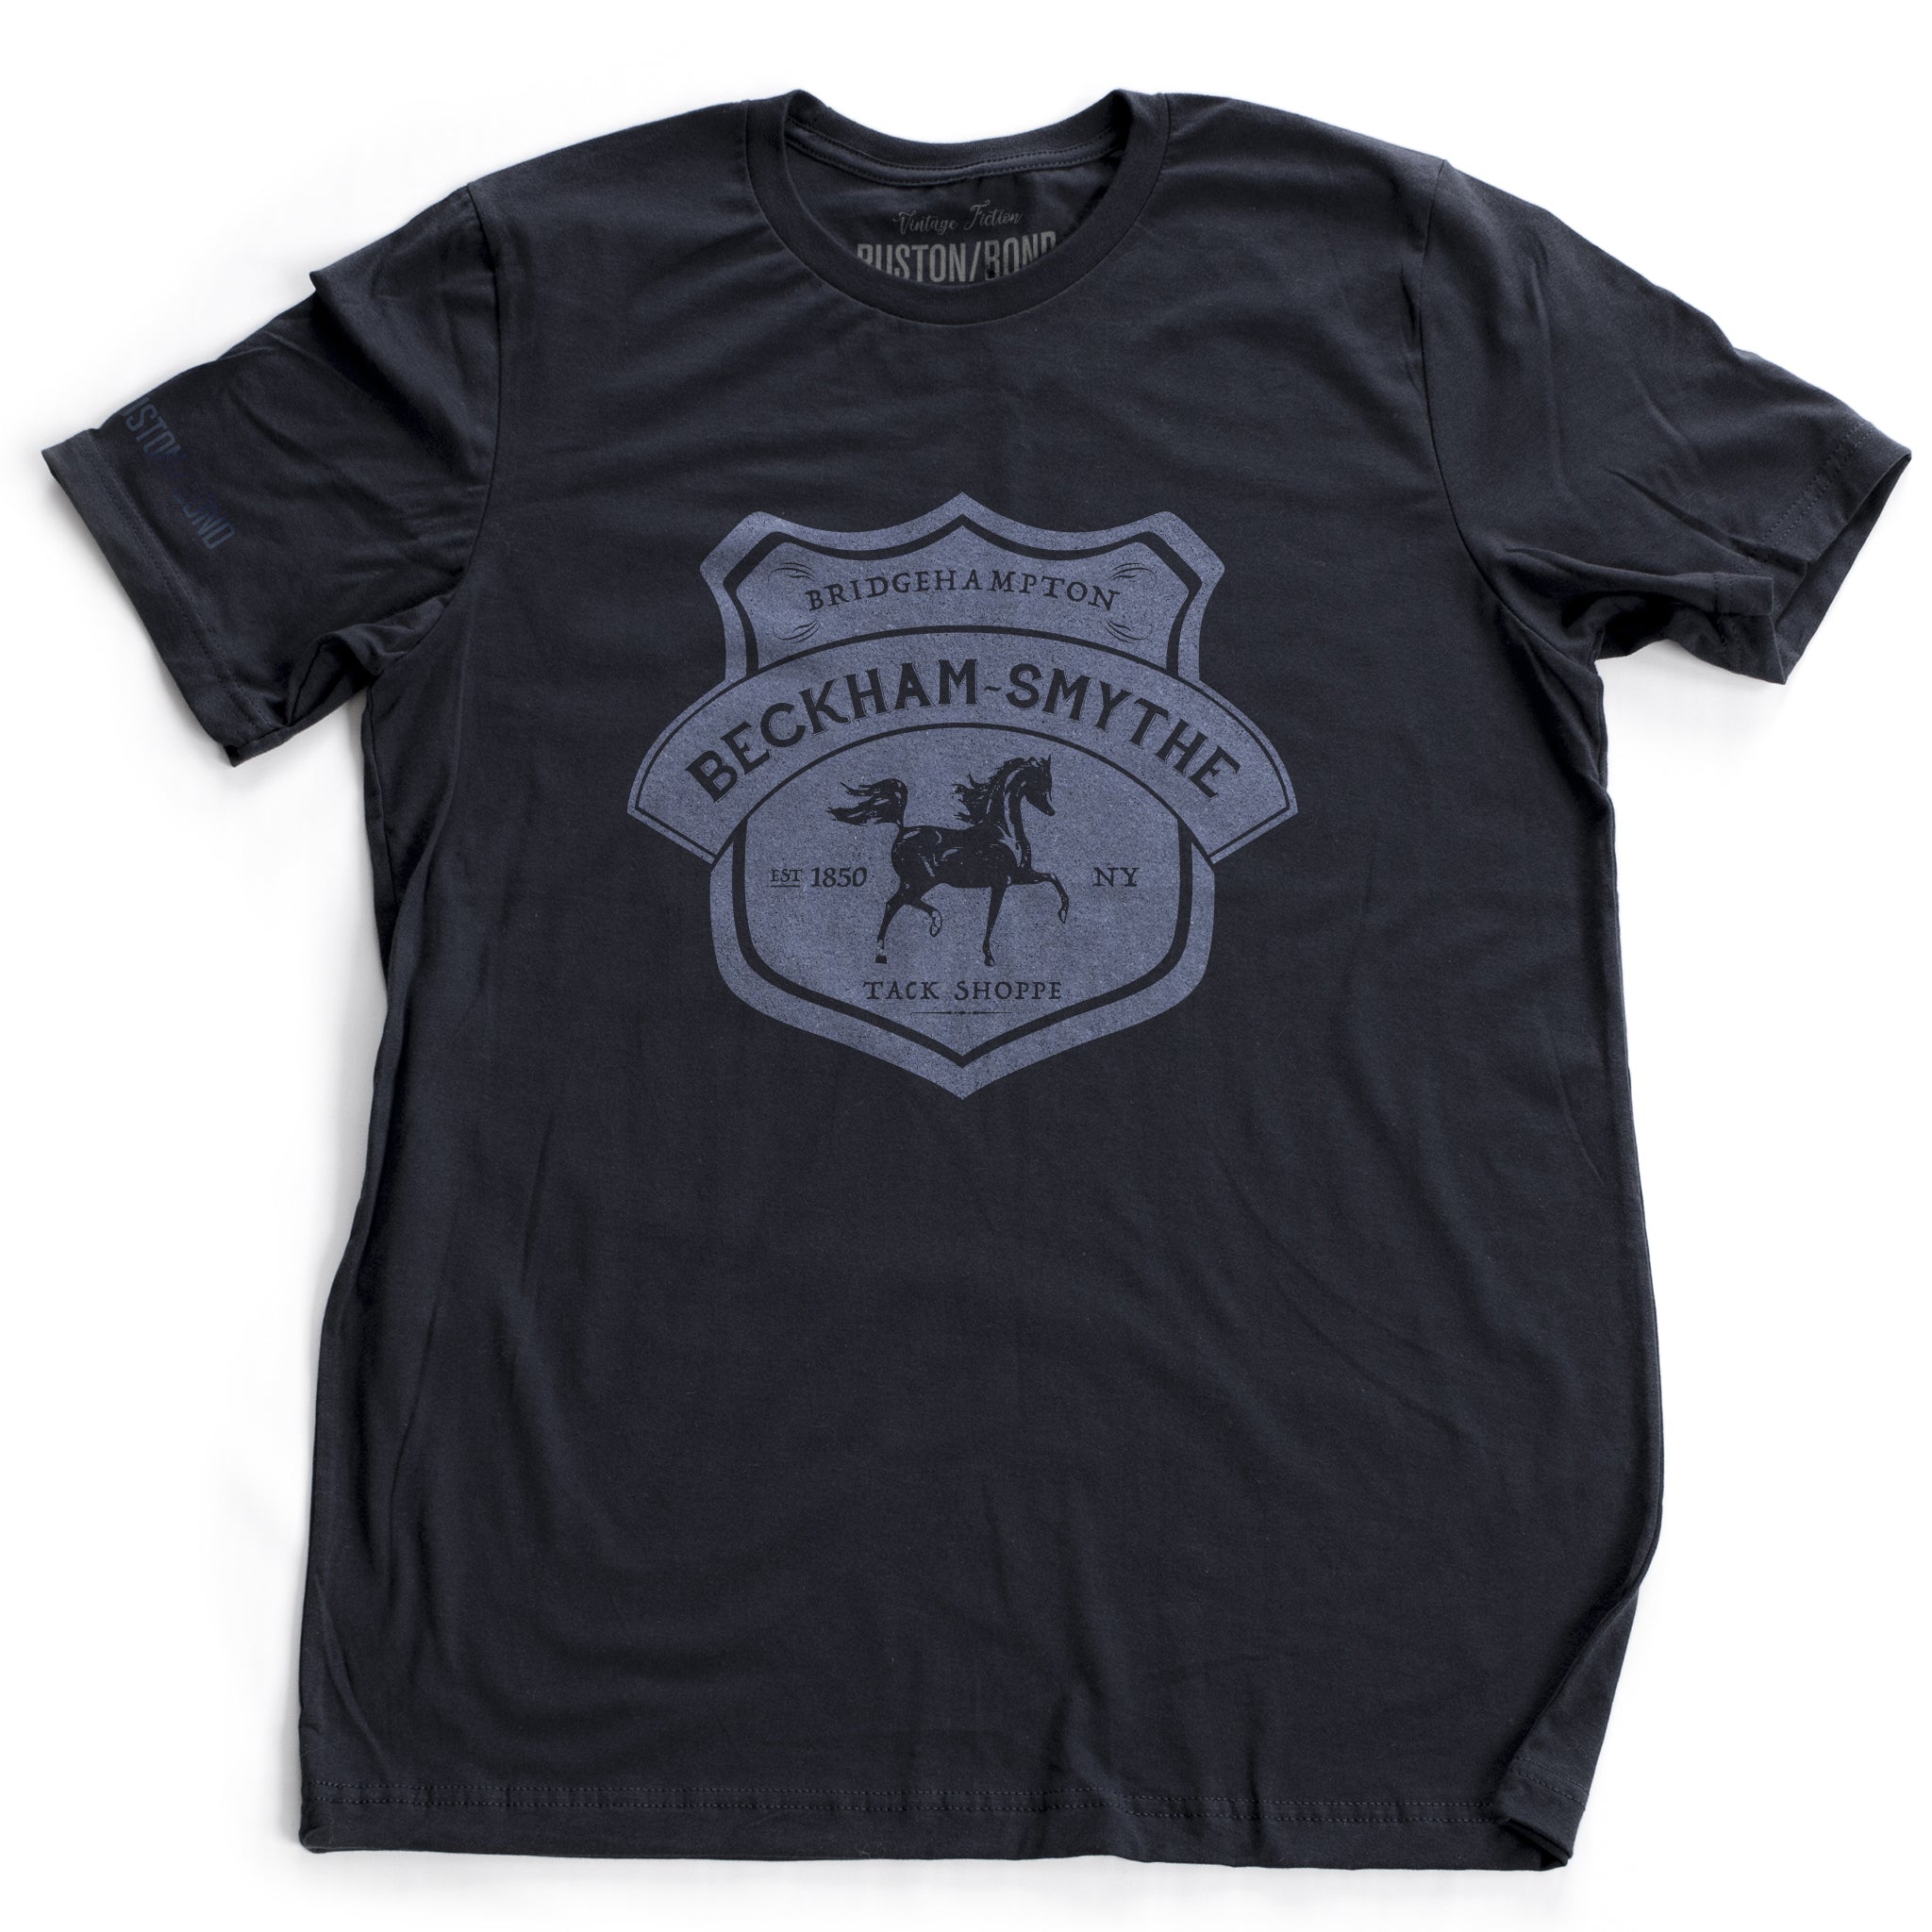 Navy Blue fashion style, retro, vintage-inspired t-shirt with a classic graphic of a fictional Tack shop in the Hamptons, New York (Bridgehampton). From the stylish brand Ruston/Bond, with a parody of Hermes style.